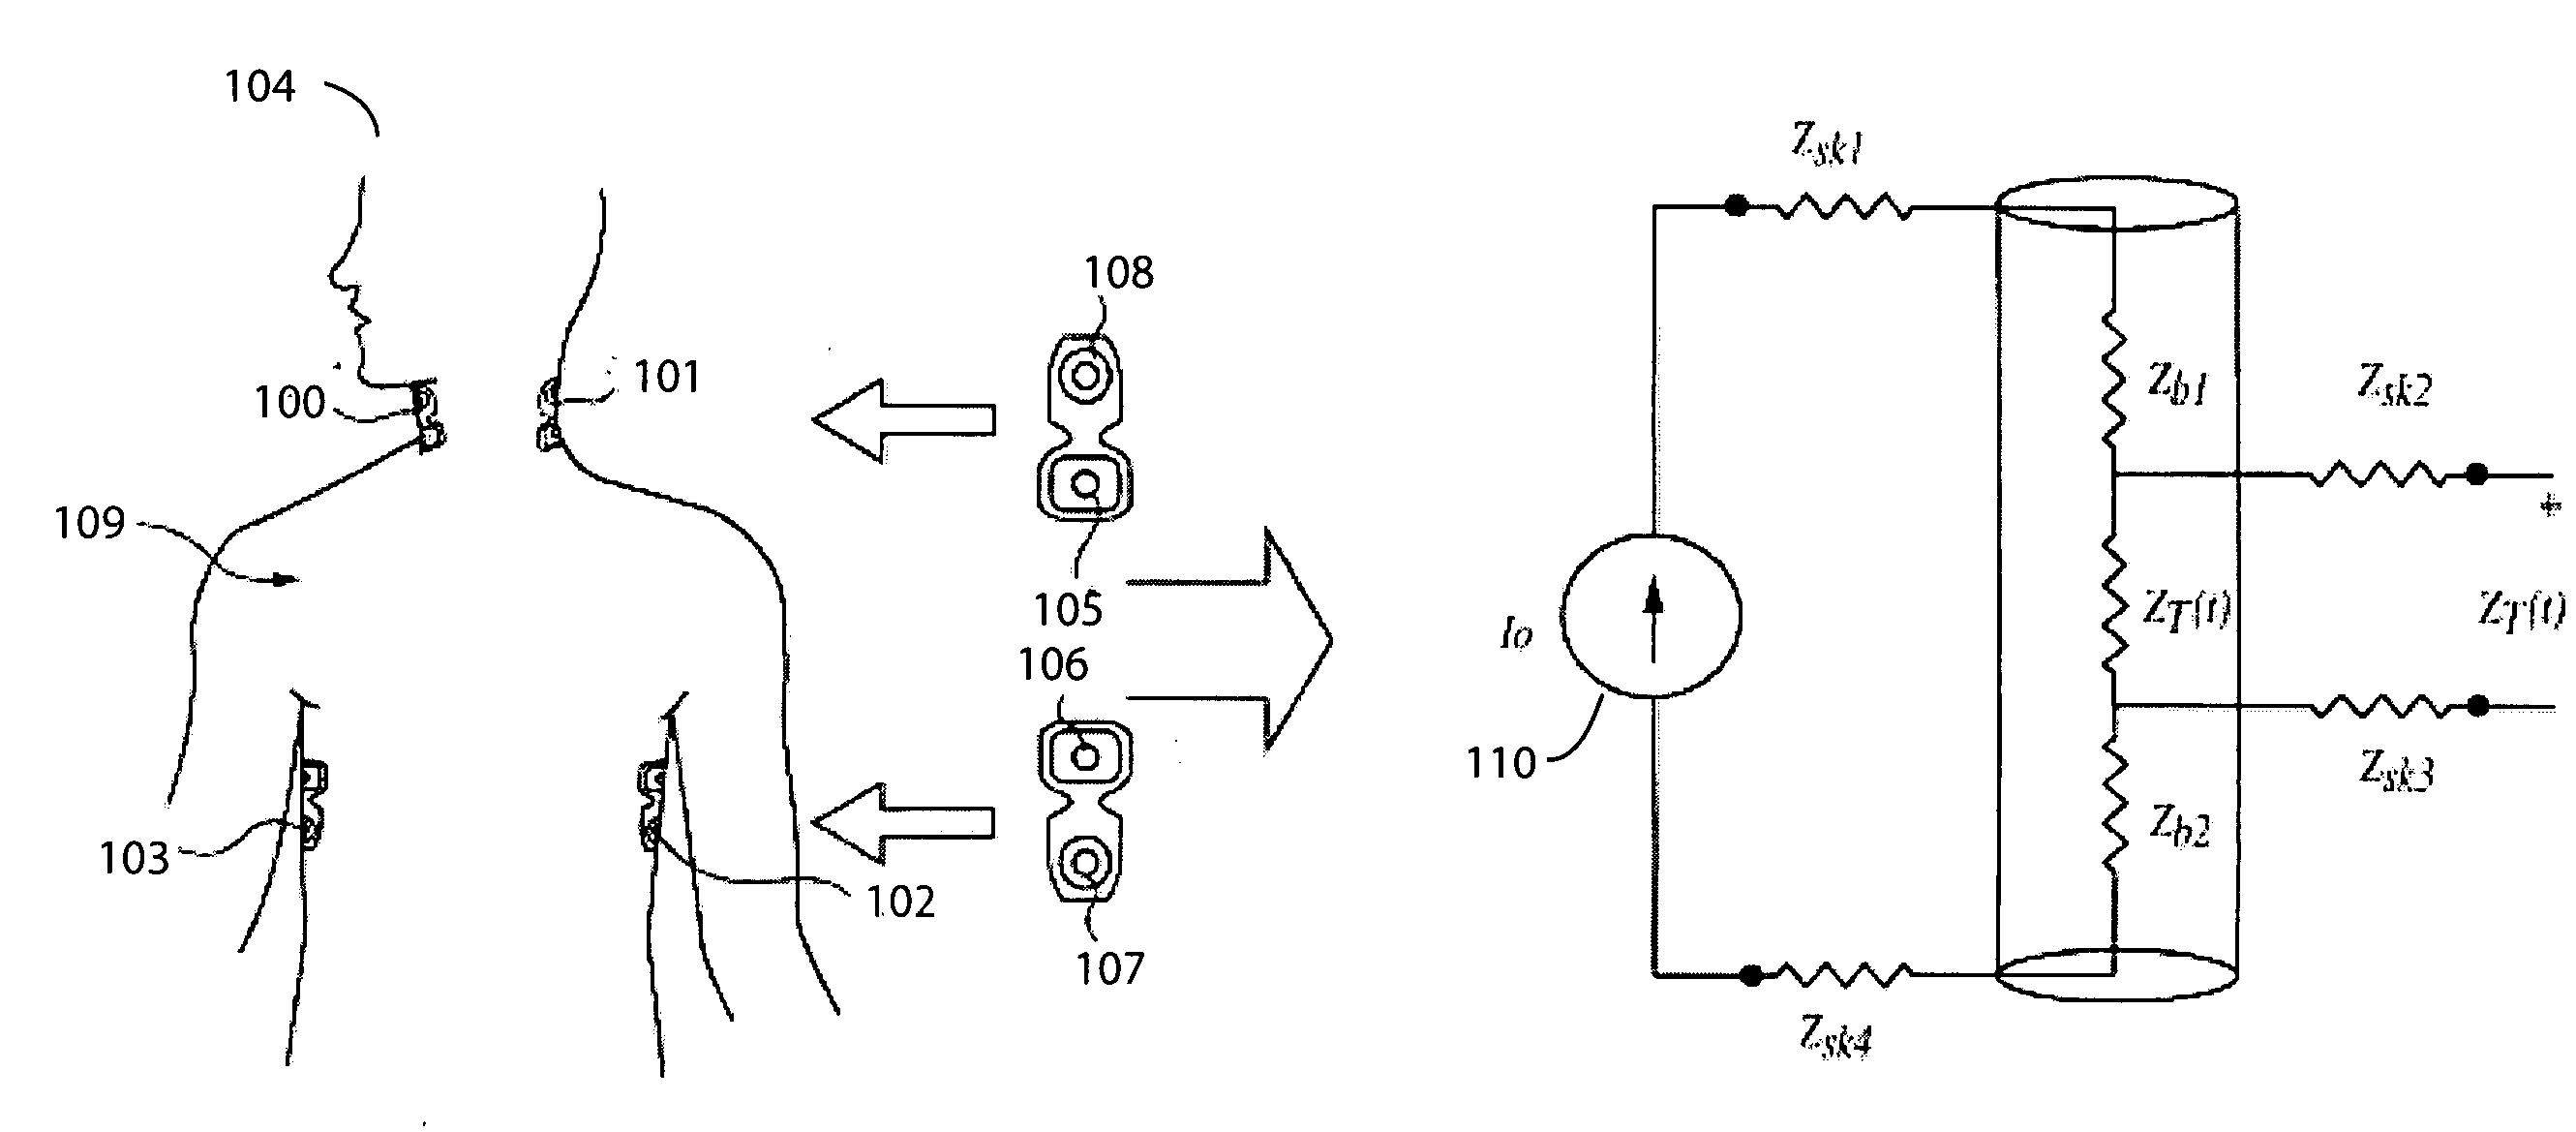 System and method for ICG recording and analysis